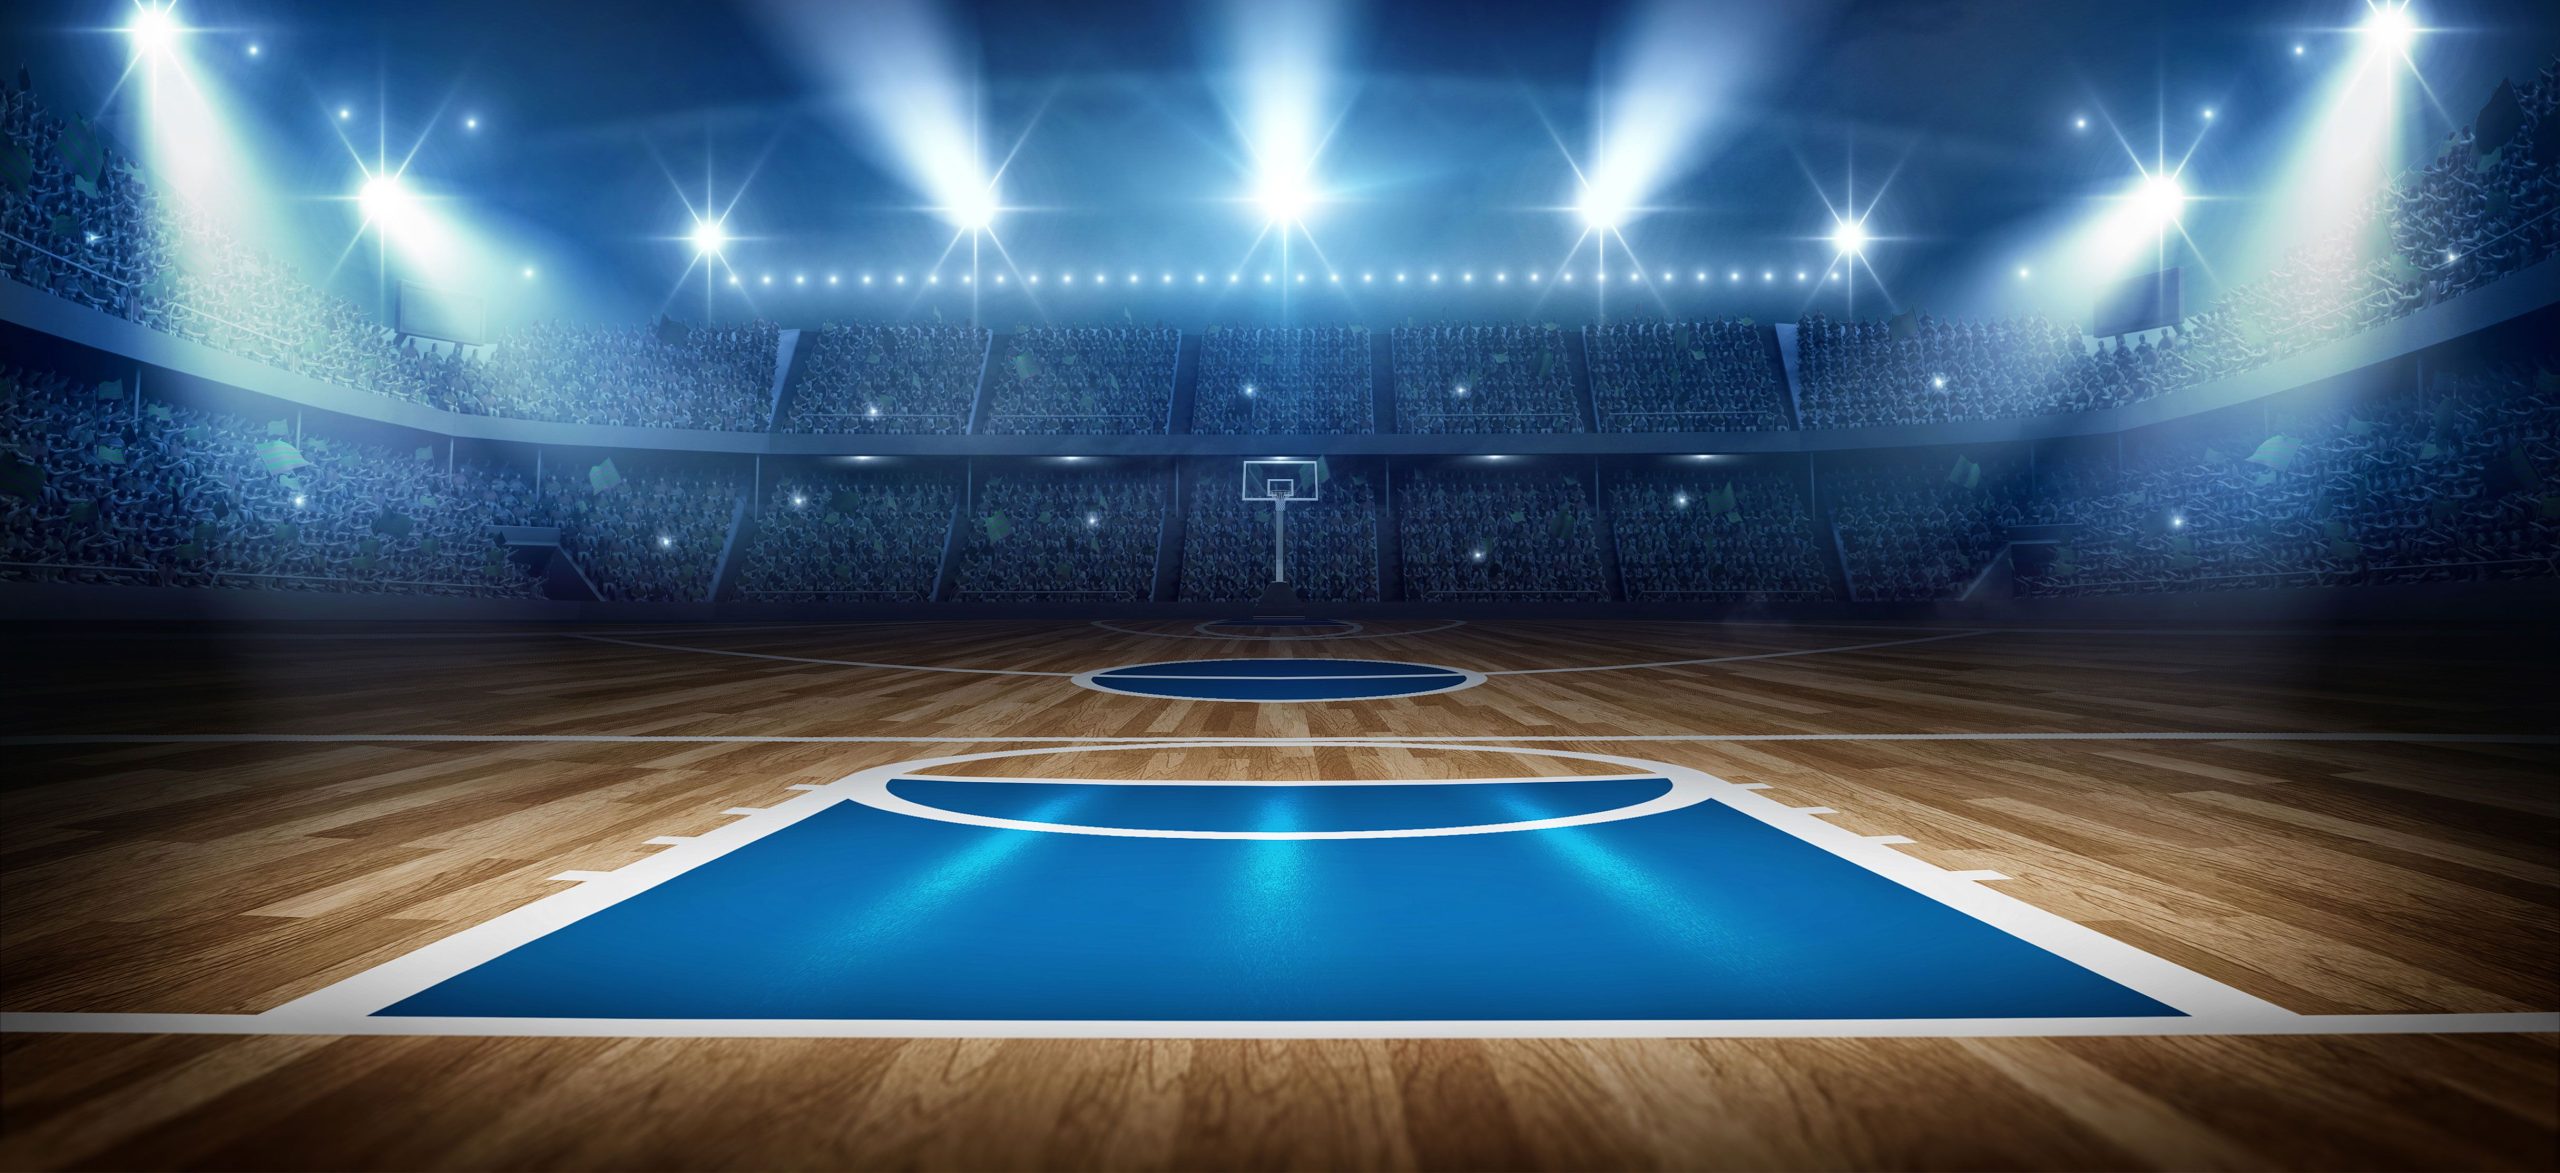 Background image for NBA All-Star Game